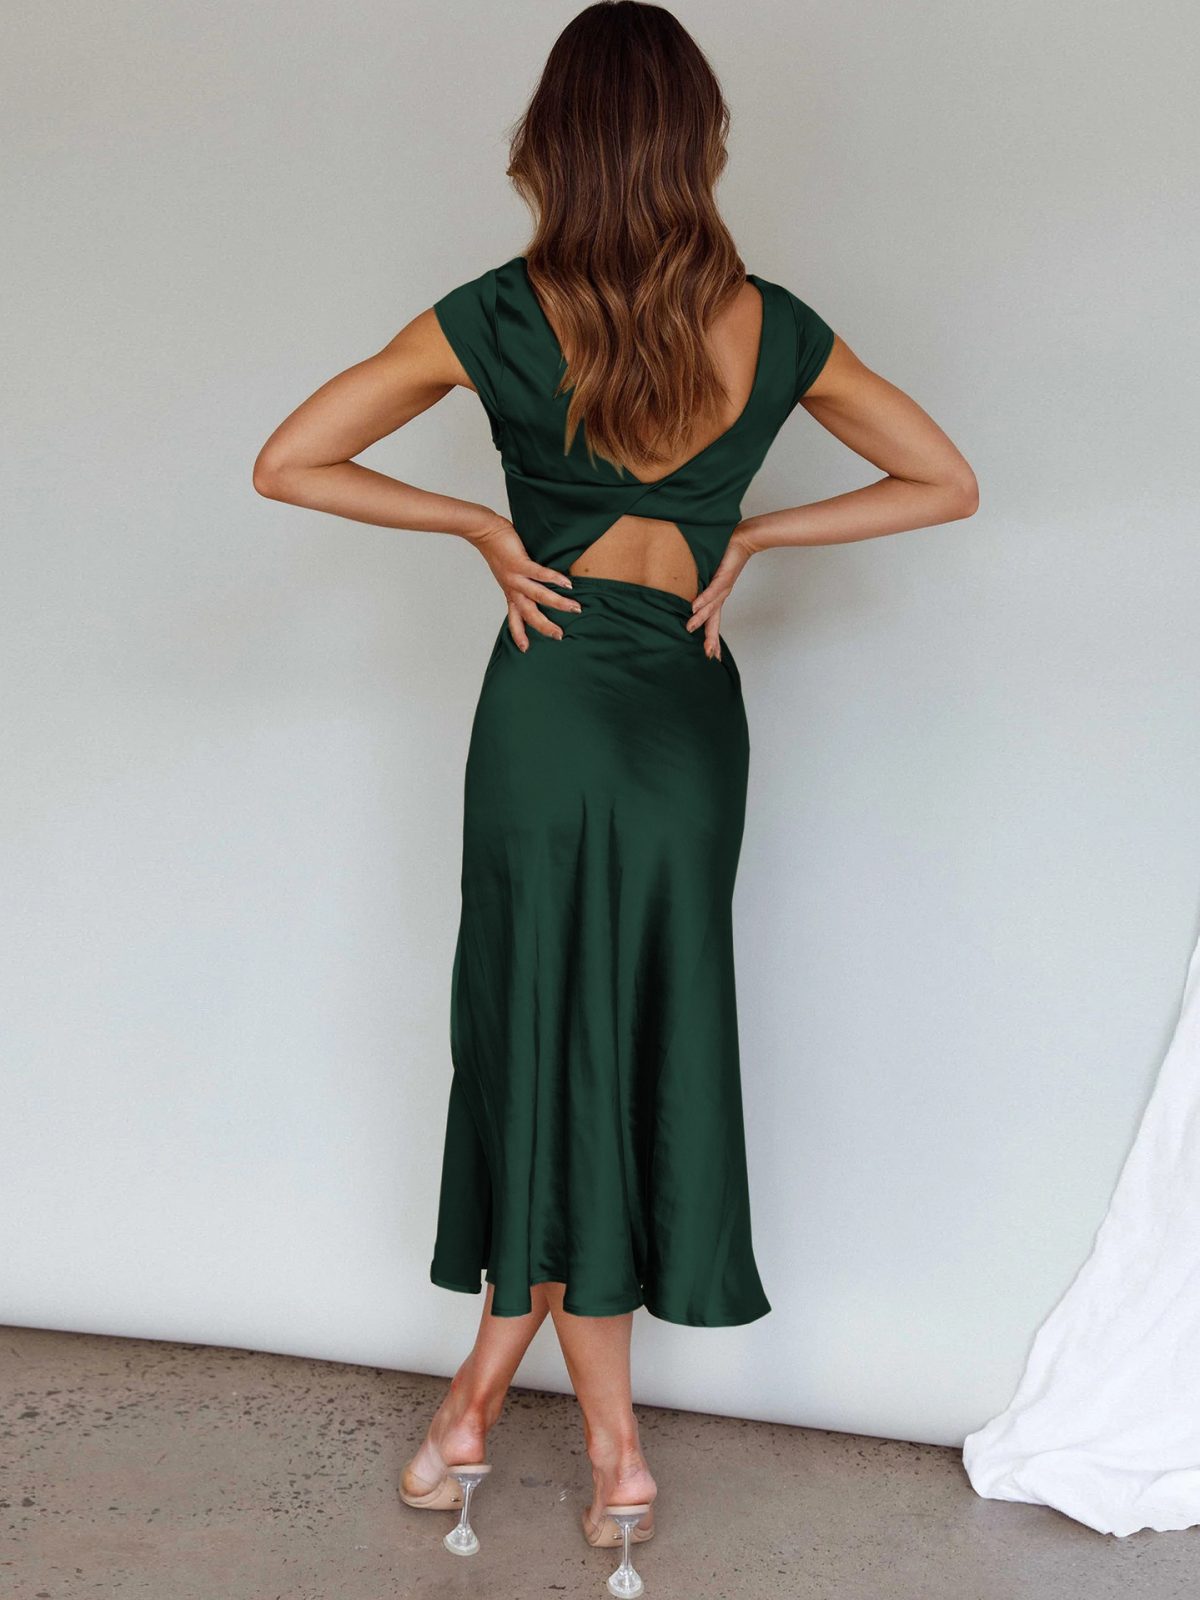 Sexy Slimming Backless Pure Satin Evening Dress in Dresses